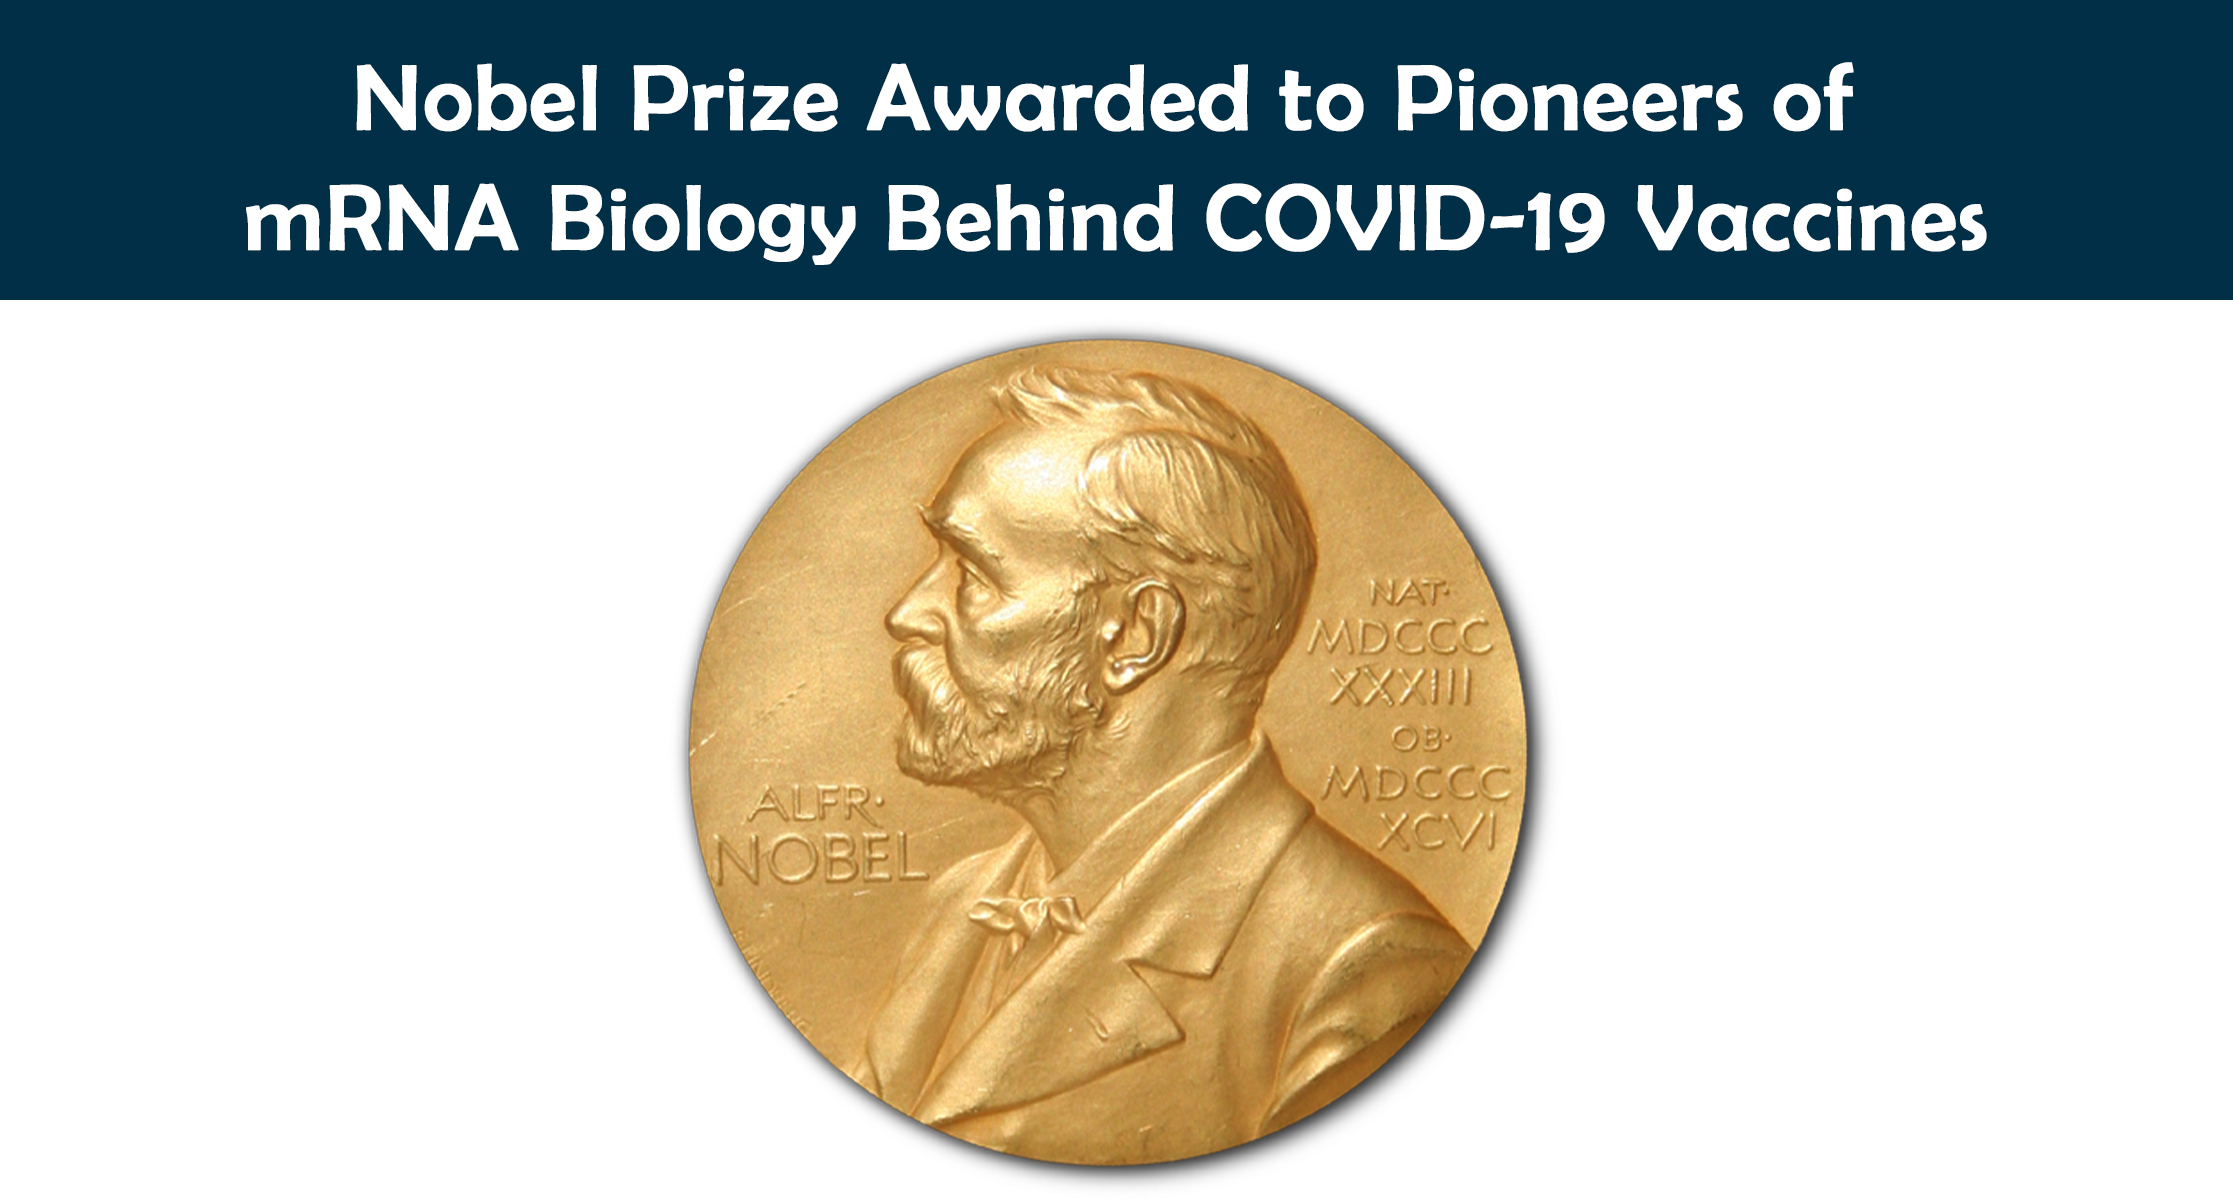 Nobel Prize Awarded to Pioneers of mRNA Biology Behind COVID-19 Vaccines